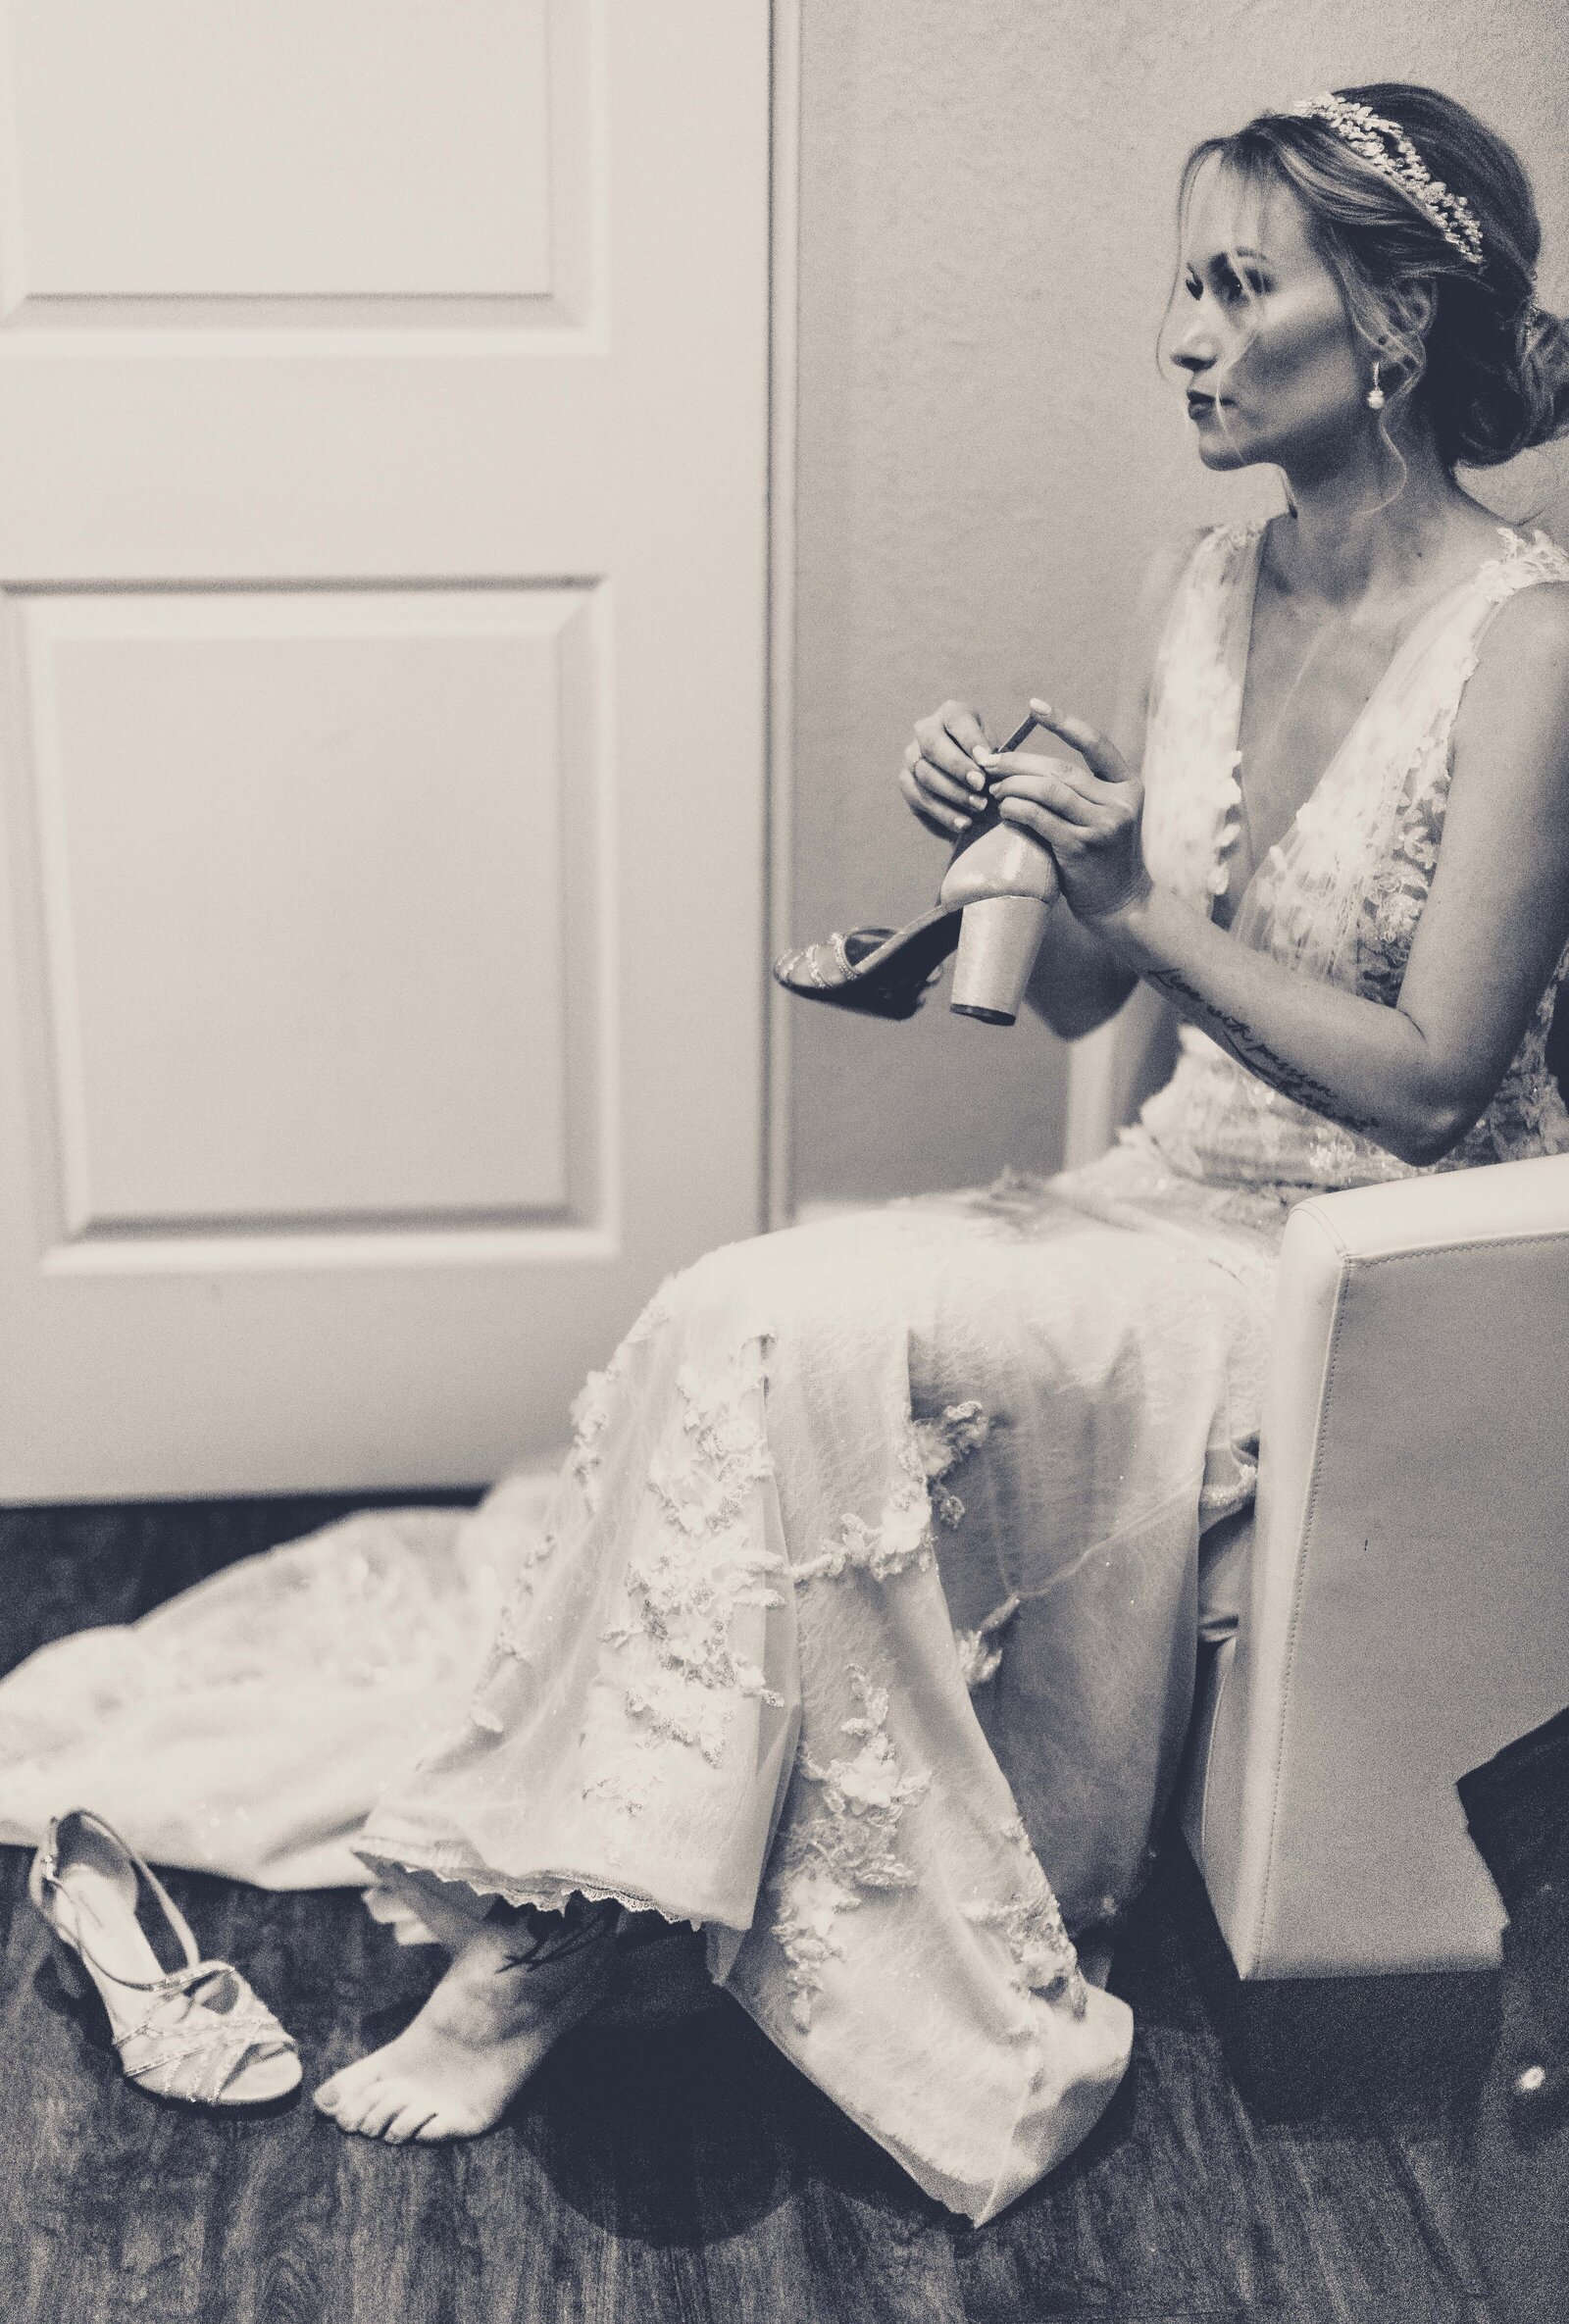 Capture the intimate and serene moments of a bride's preparations with our stunning photograph featuring a bride delicately putting on her elegant shoes. This image embodies the excitement and beauty of the final touches before walking down the aisle. Explore more heartfelt wedding preparation photos in our collection to inspire your own bridal journey.